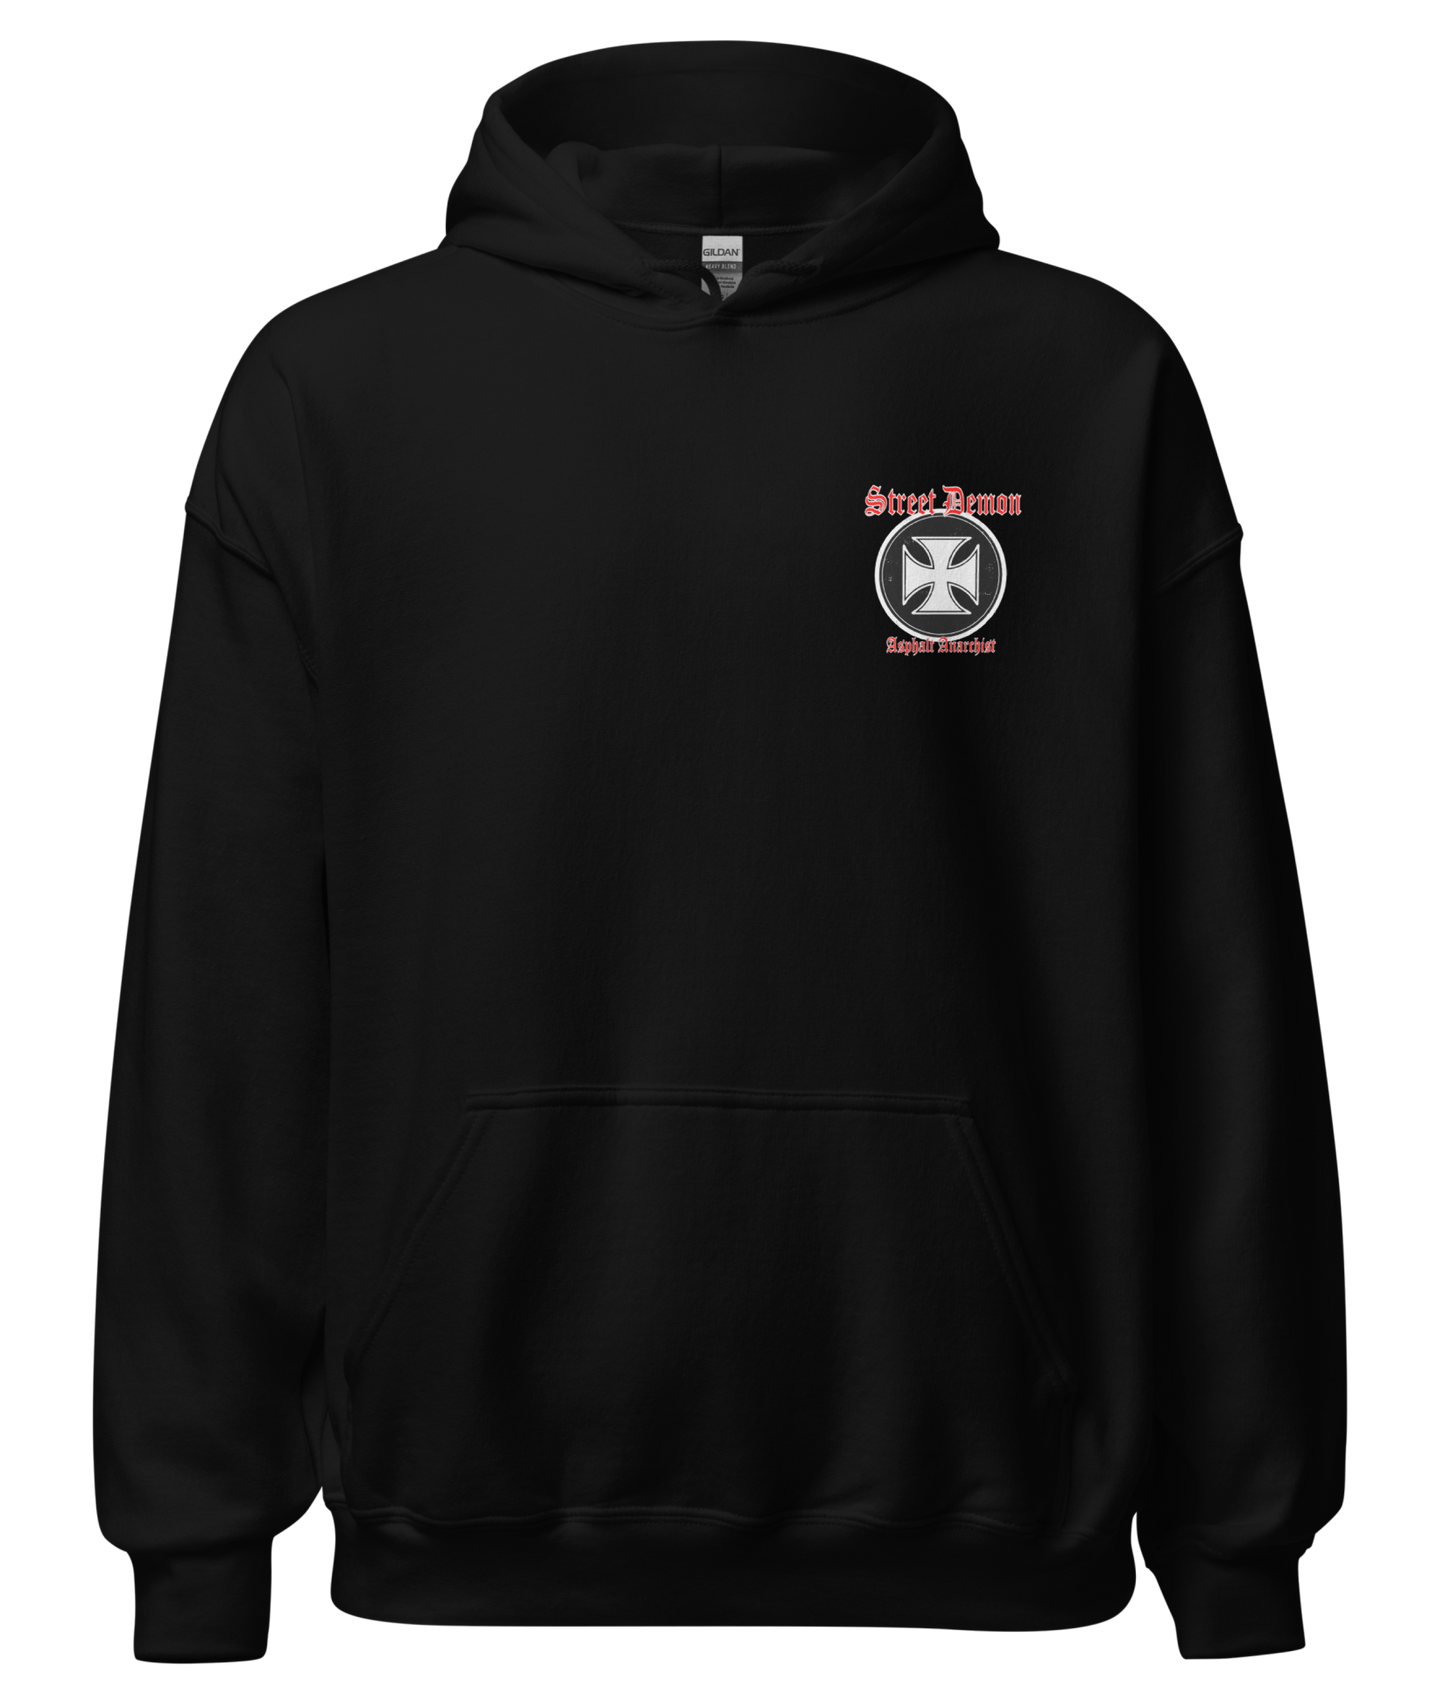 The Street Demon Hoodie From Asphalt Anarchist Clothing Co. HOT ROD KUSTOM KULTURE APPAREL & PRODUCTS